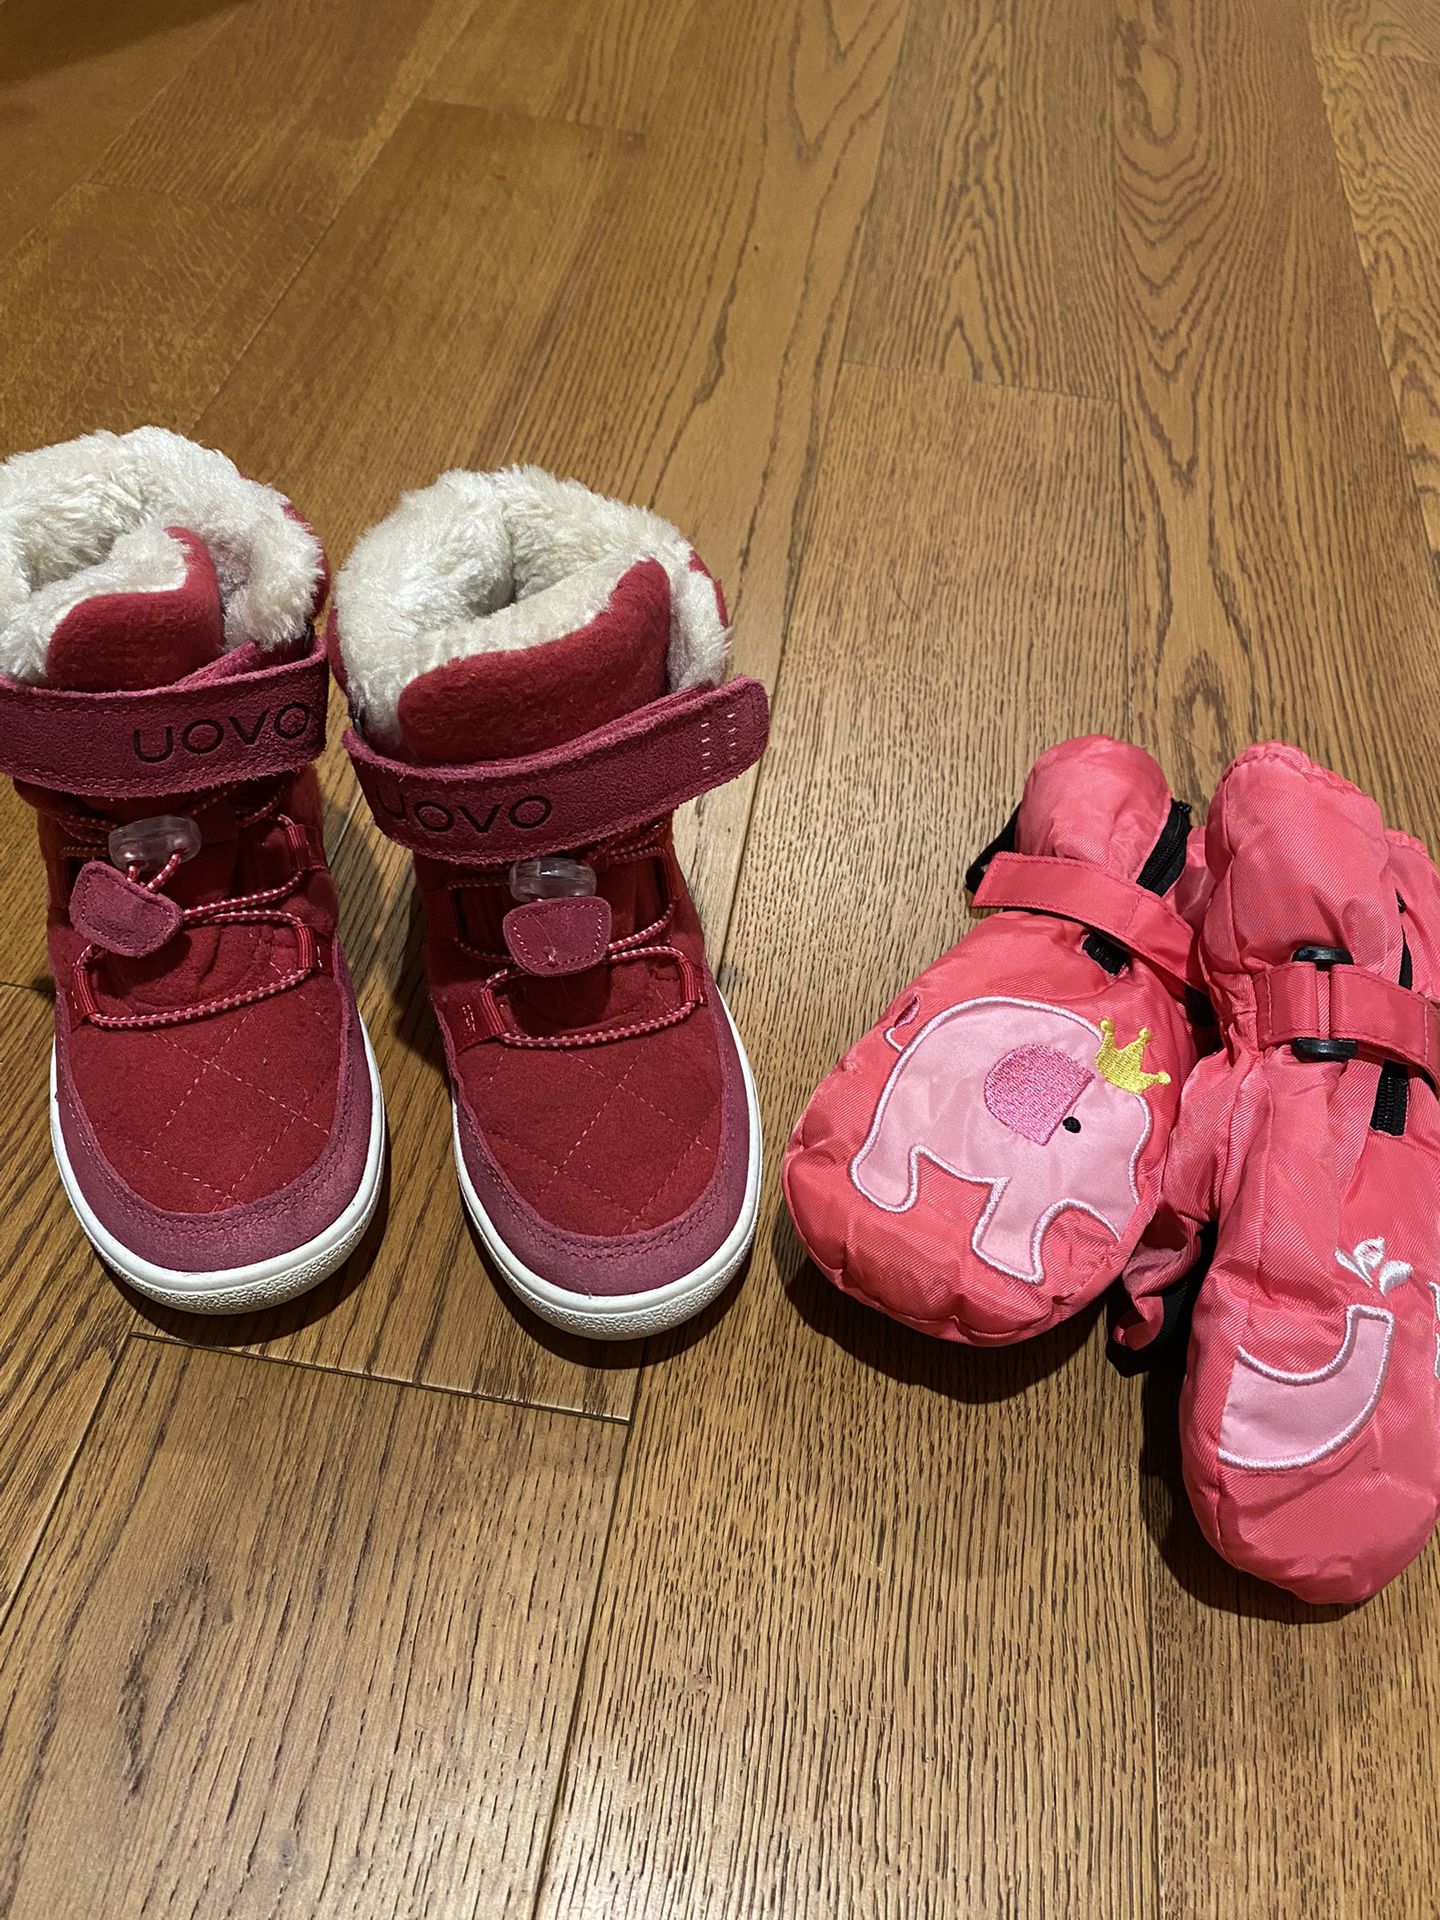 Kids Snow Boots And Gloves